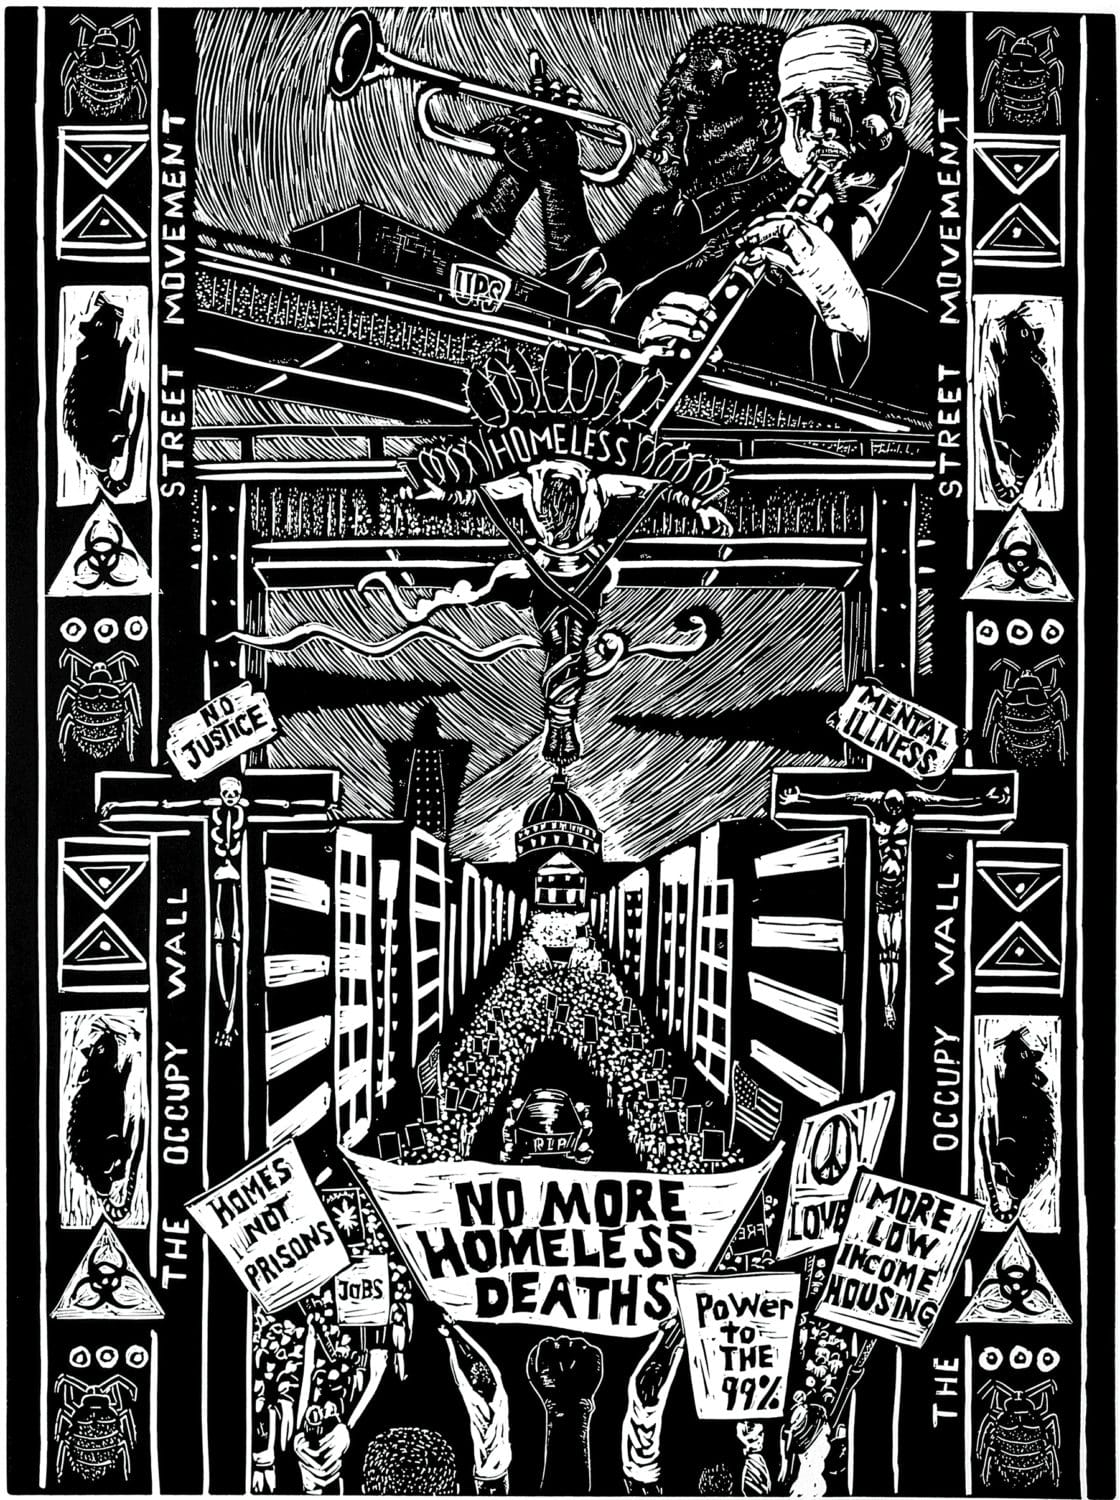 The-Occupy-Homeless-Movement-linocut-print-2011-24-x-18-by-Ronnie-Goodman, Ronnie Goodman, artist with ‘a visual voice’ on homelessness, 1960-2020, Culture Currents 